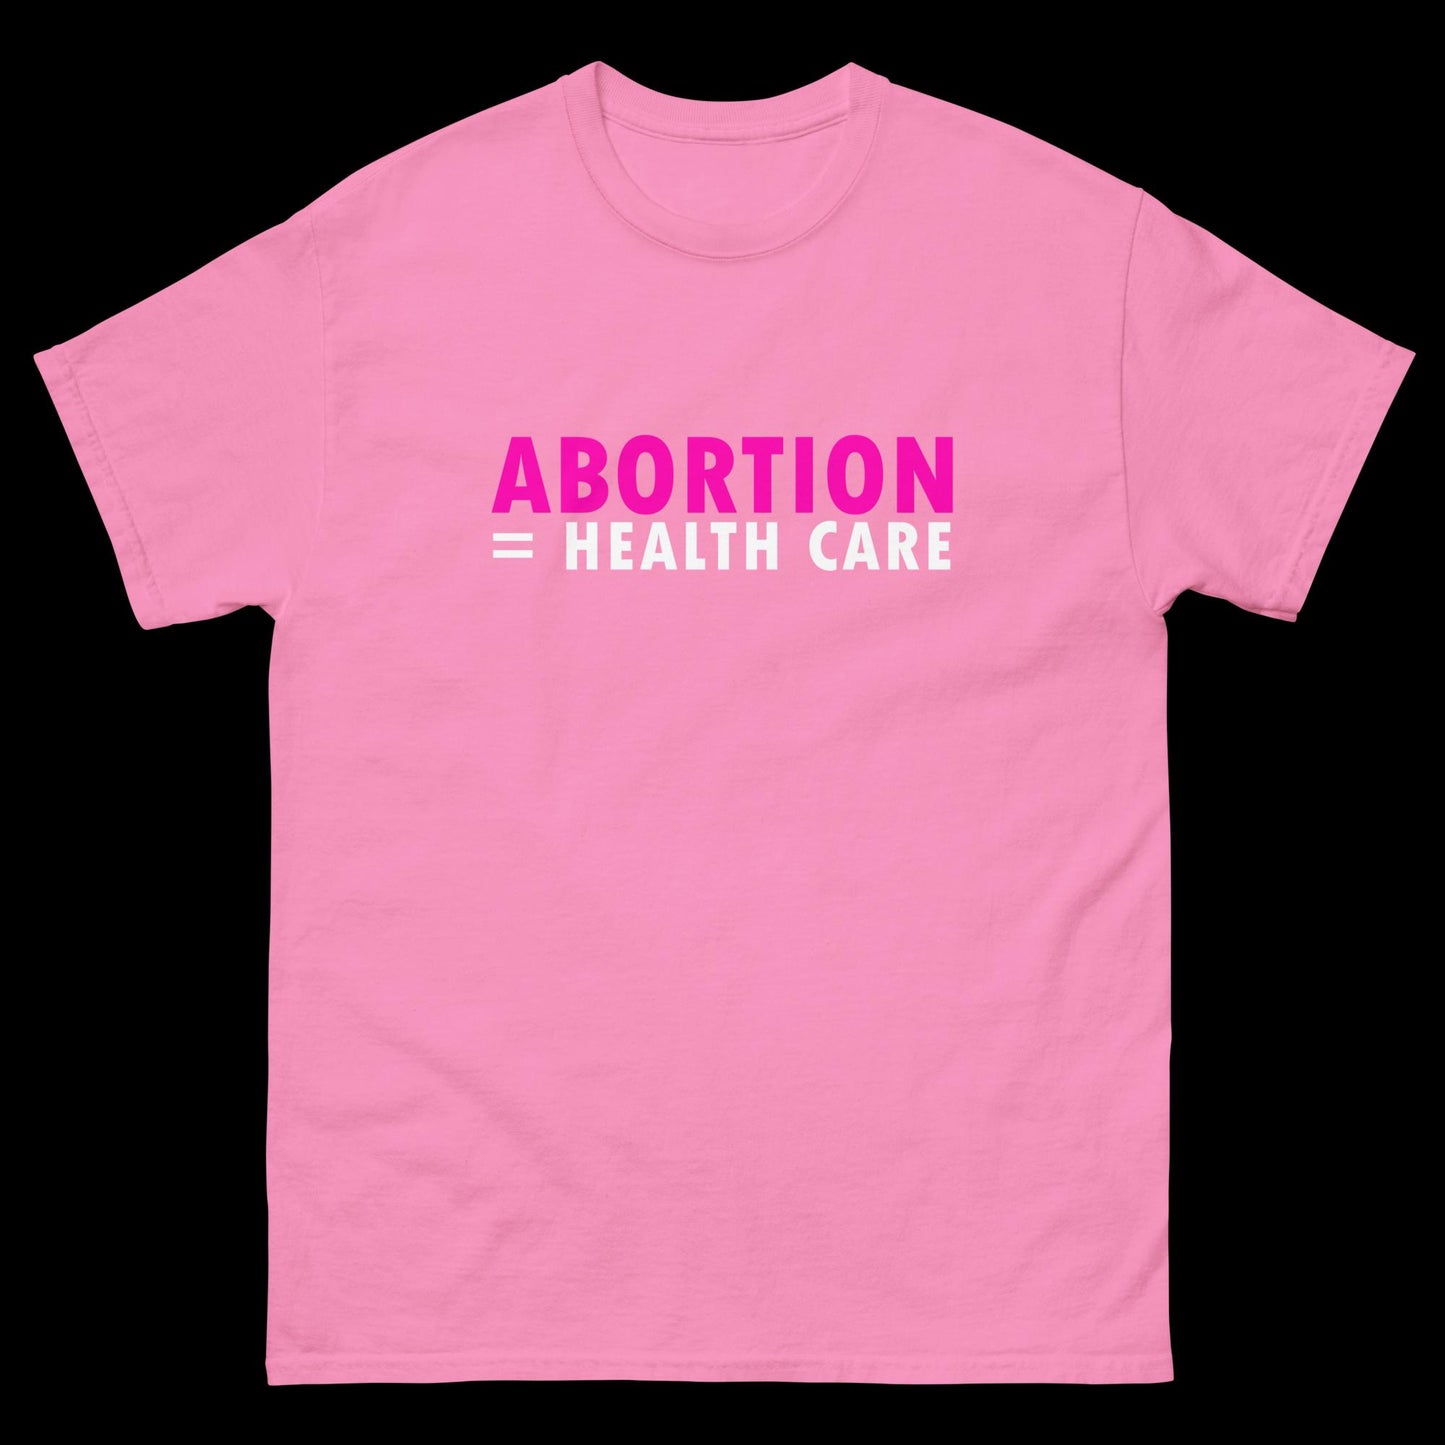 Abortion Equals Health Care - Classic T-Shirt